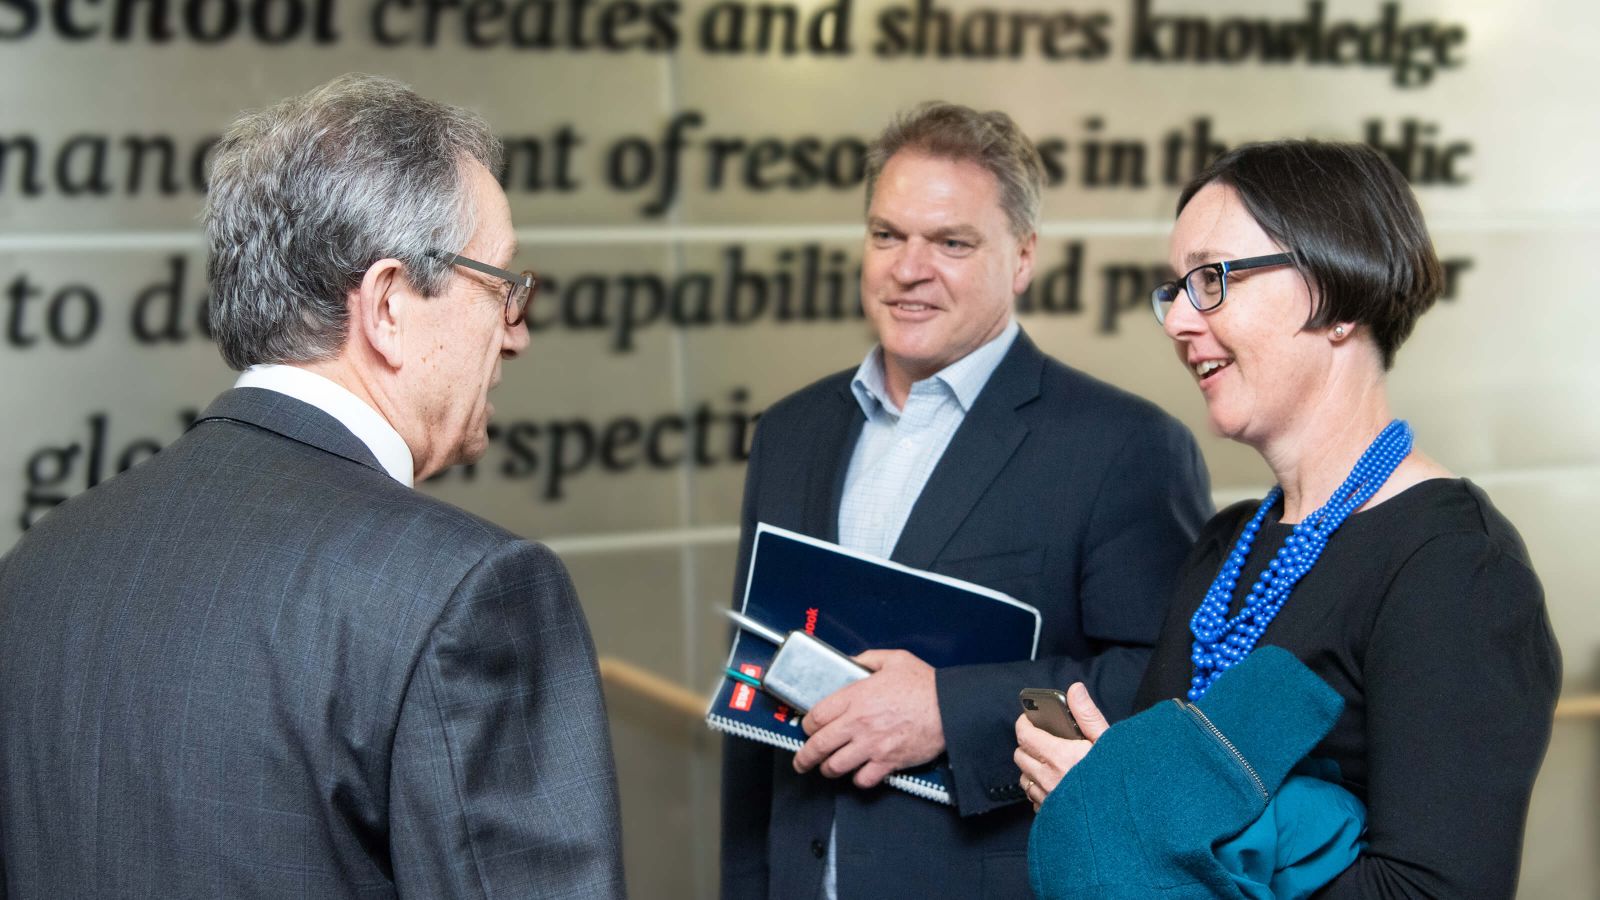 A man in a suit and a woman wearing a blue necklace talk with Professor Girol Karacaoglu at Victoria Business School during an event.